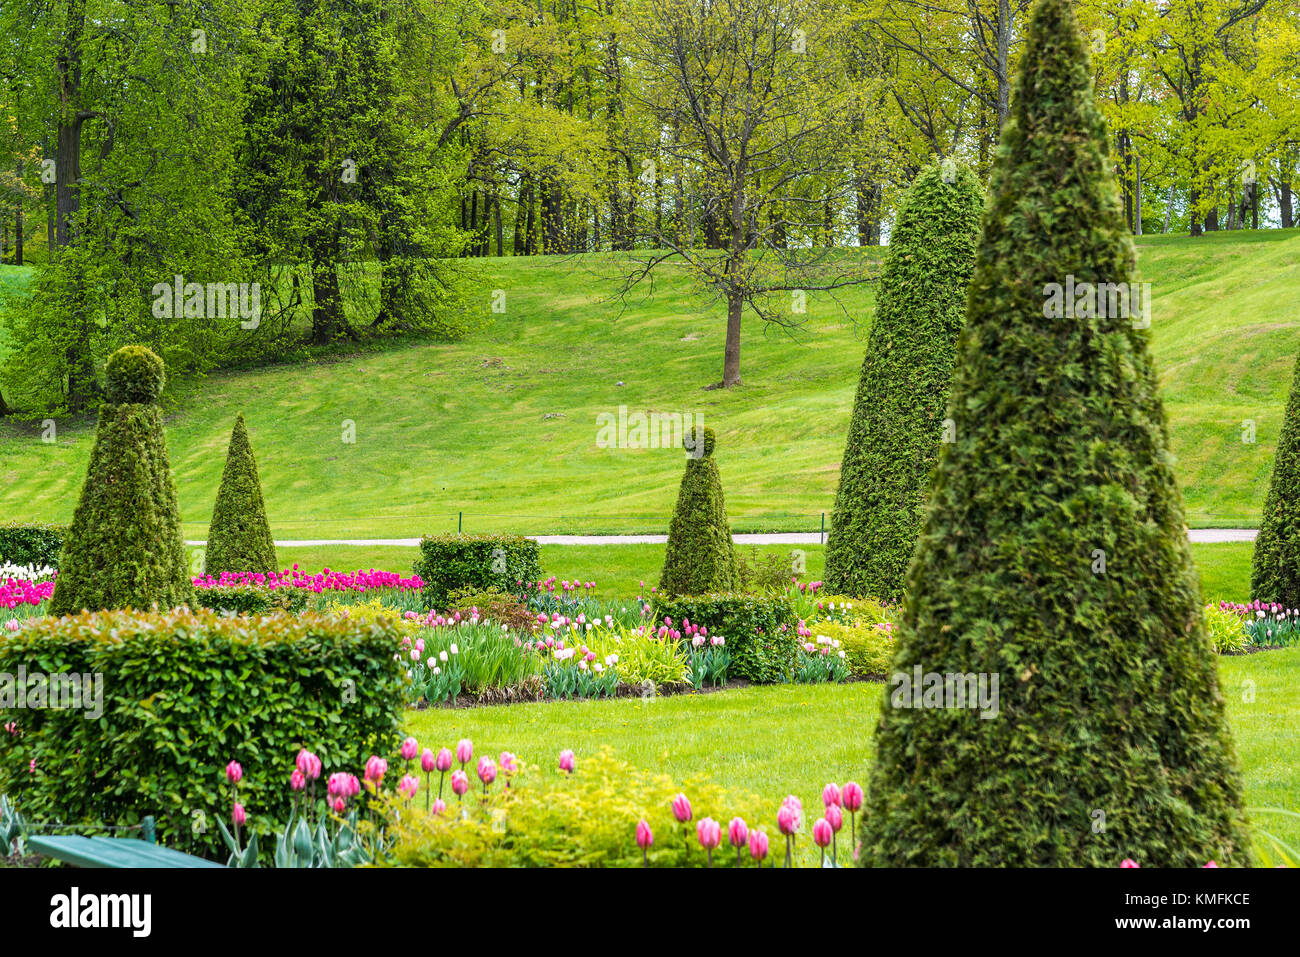 St. Petersburg, Russia - June 3 2017. Flower parterre in front of large cascade fountain Stock Photo